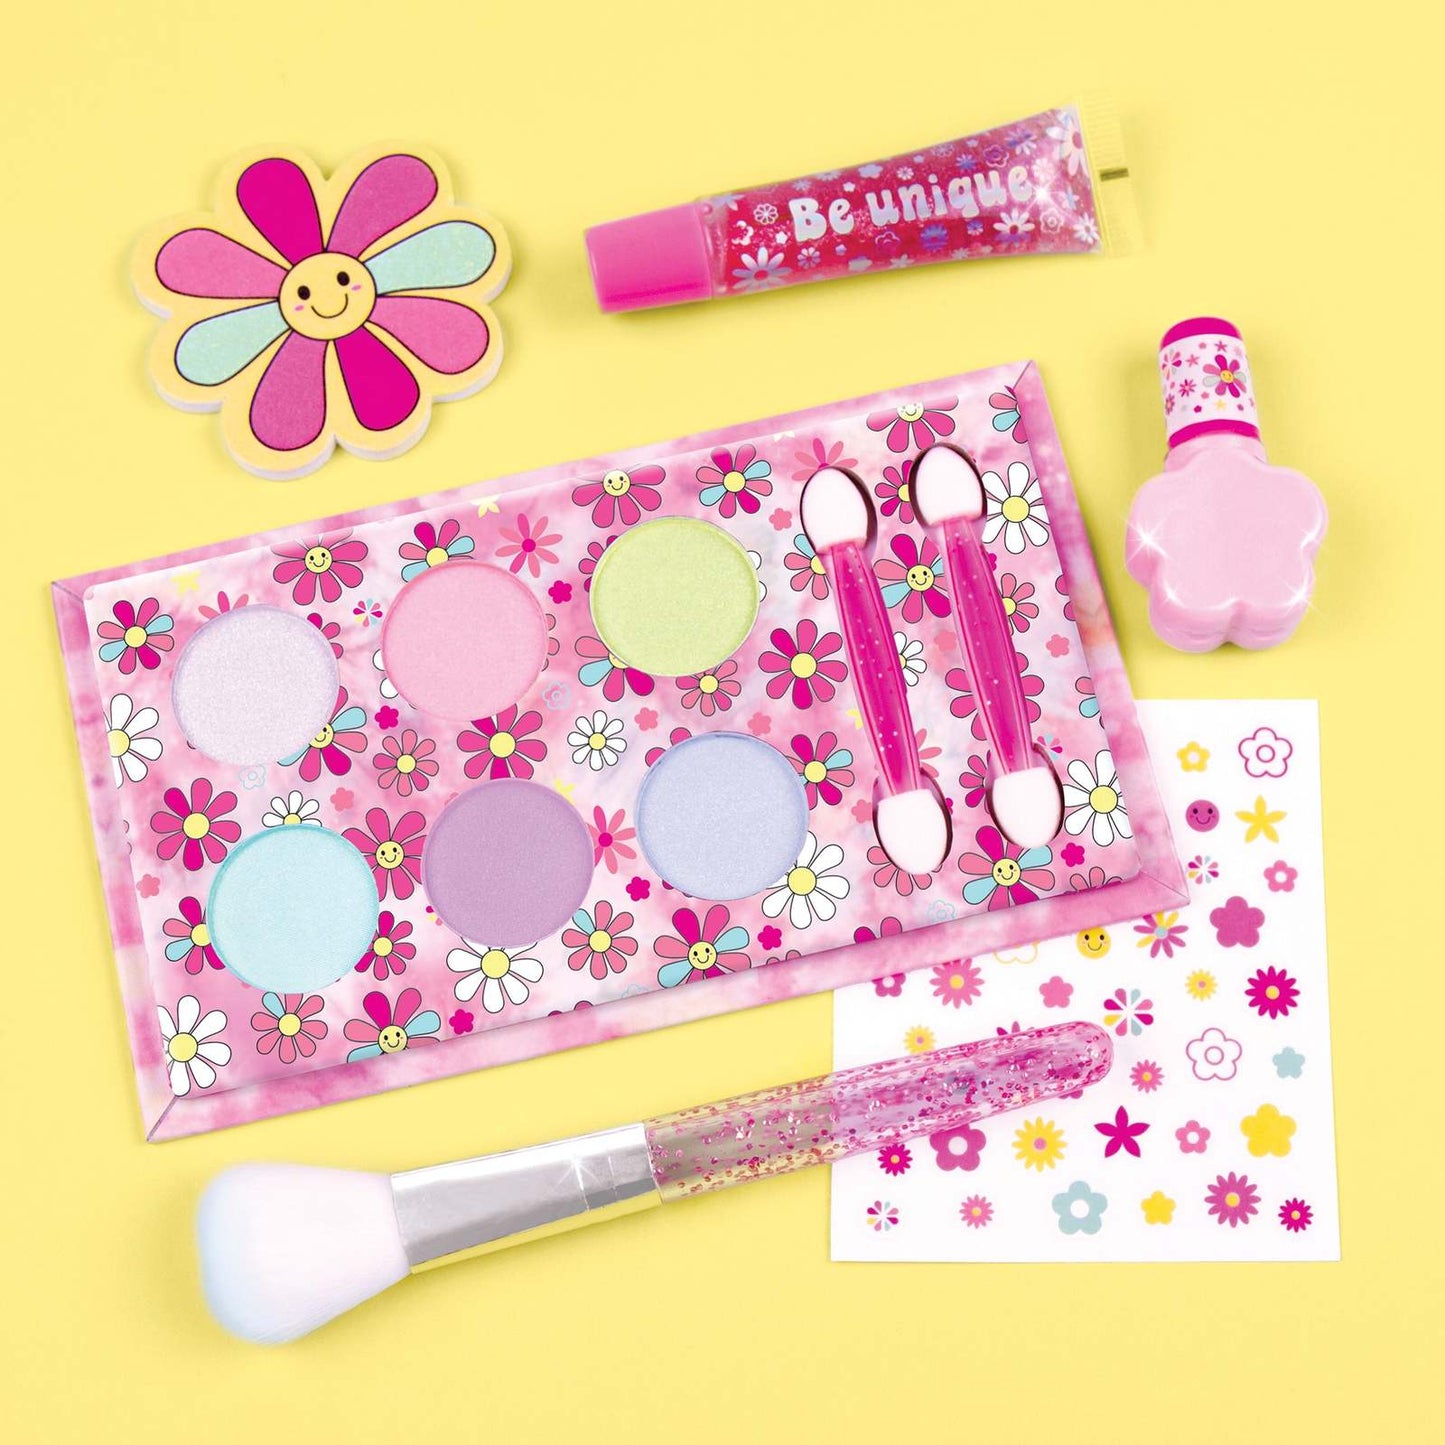 Make It Real Blooming Beauty Cosmetic Set